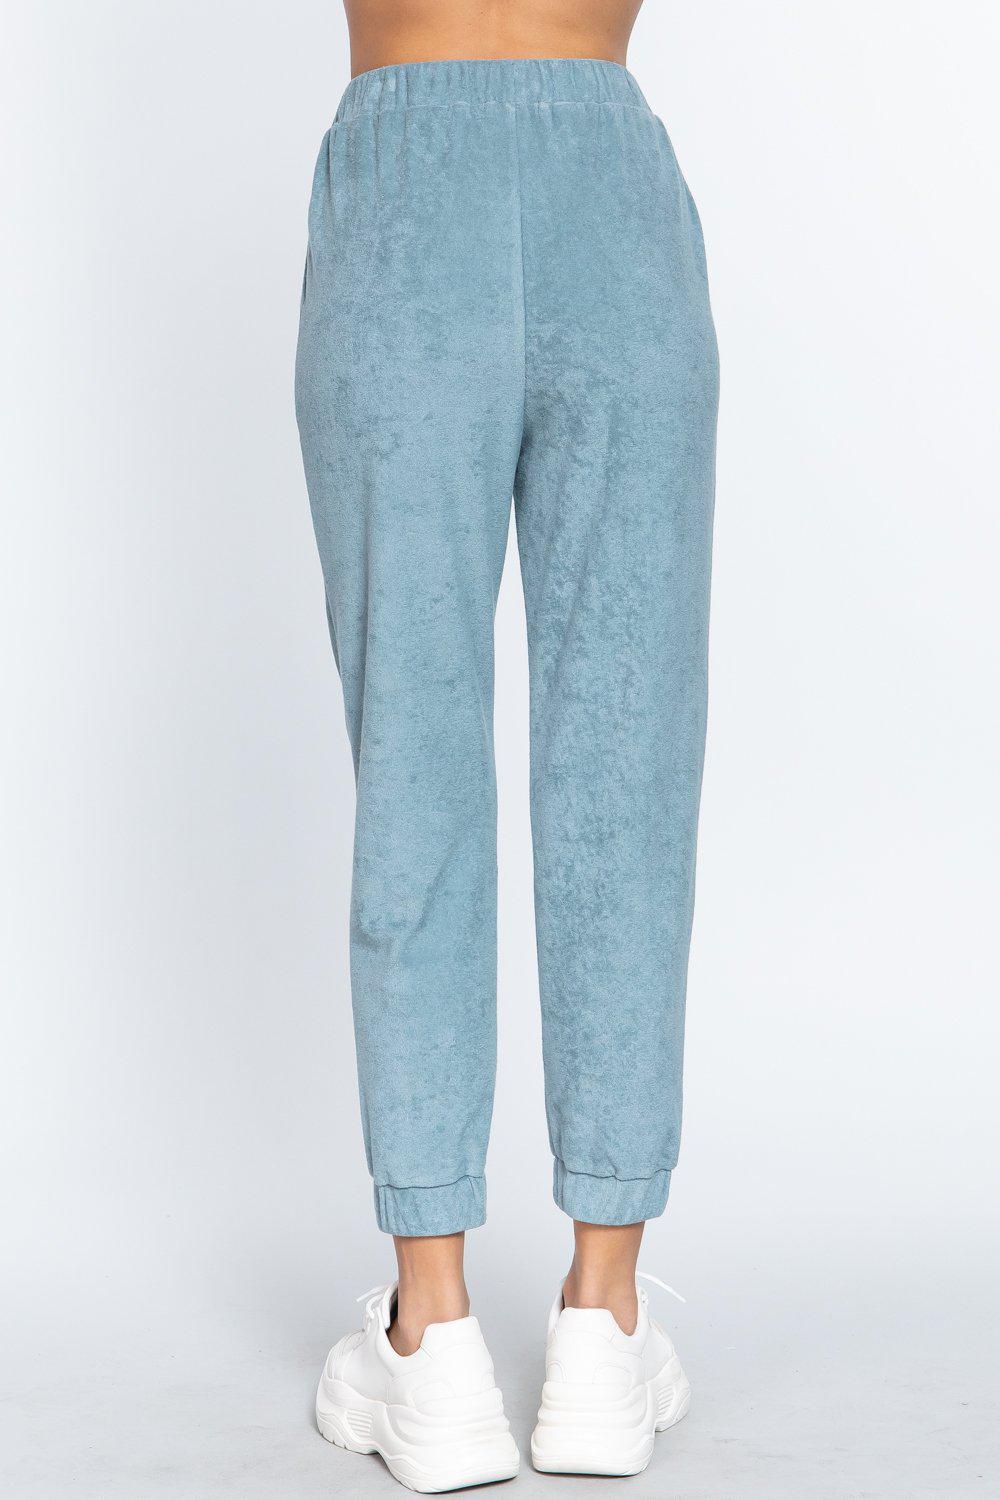 Terry Towelling Long Jogger Pants Blue Zone Planet